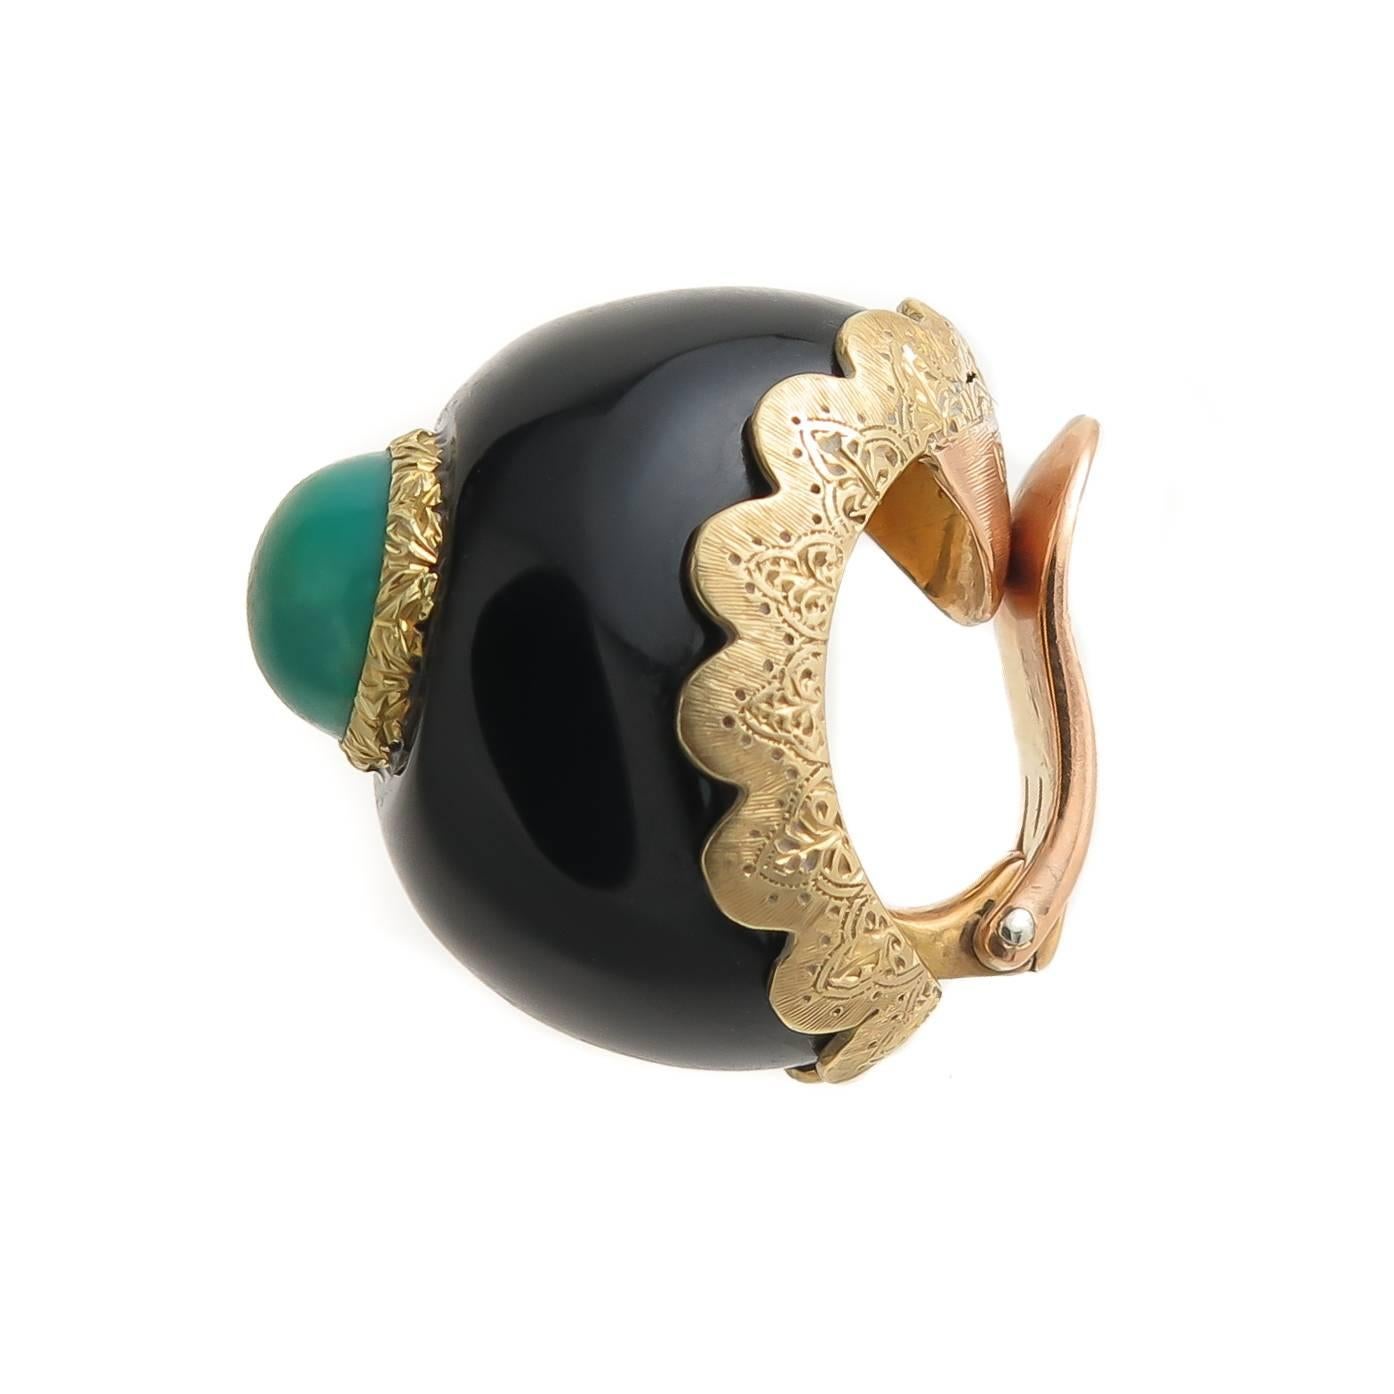 Circa 1970s Buccellati 18K Yellow Gold Earrings, measuring 3/4 inch in length and 1/2 inch wide, and set with Black onyx and a dark Green Turquoise, beautifully detailed with hand engraving work throughout. Having clip backs to which a post can be